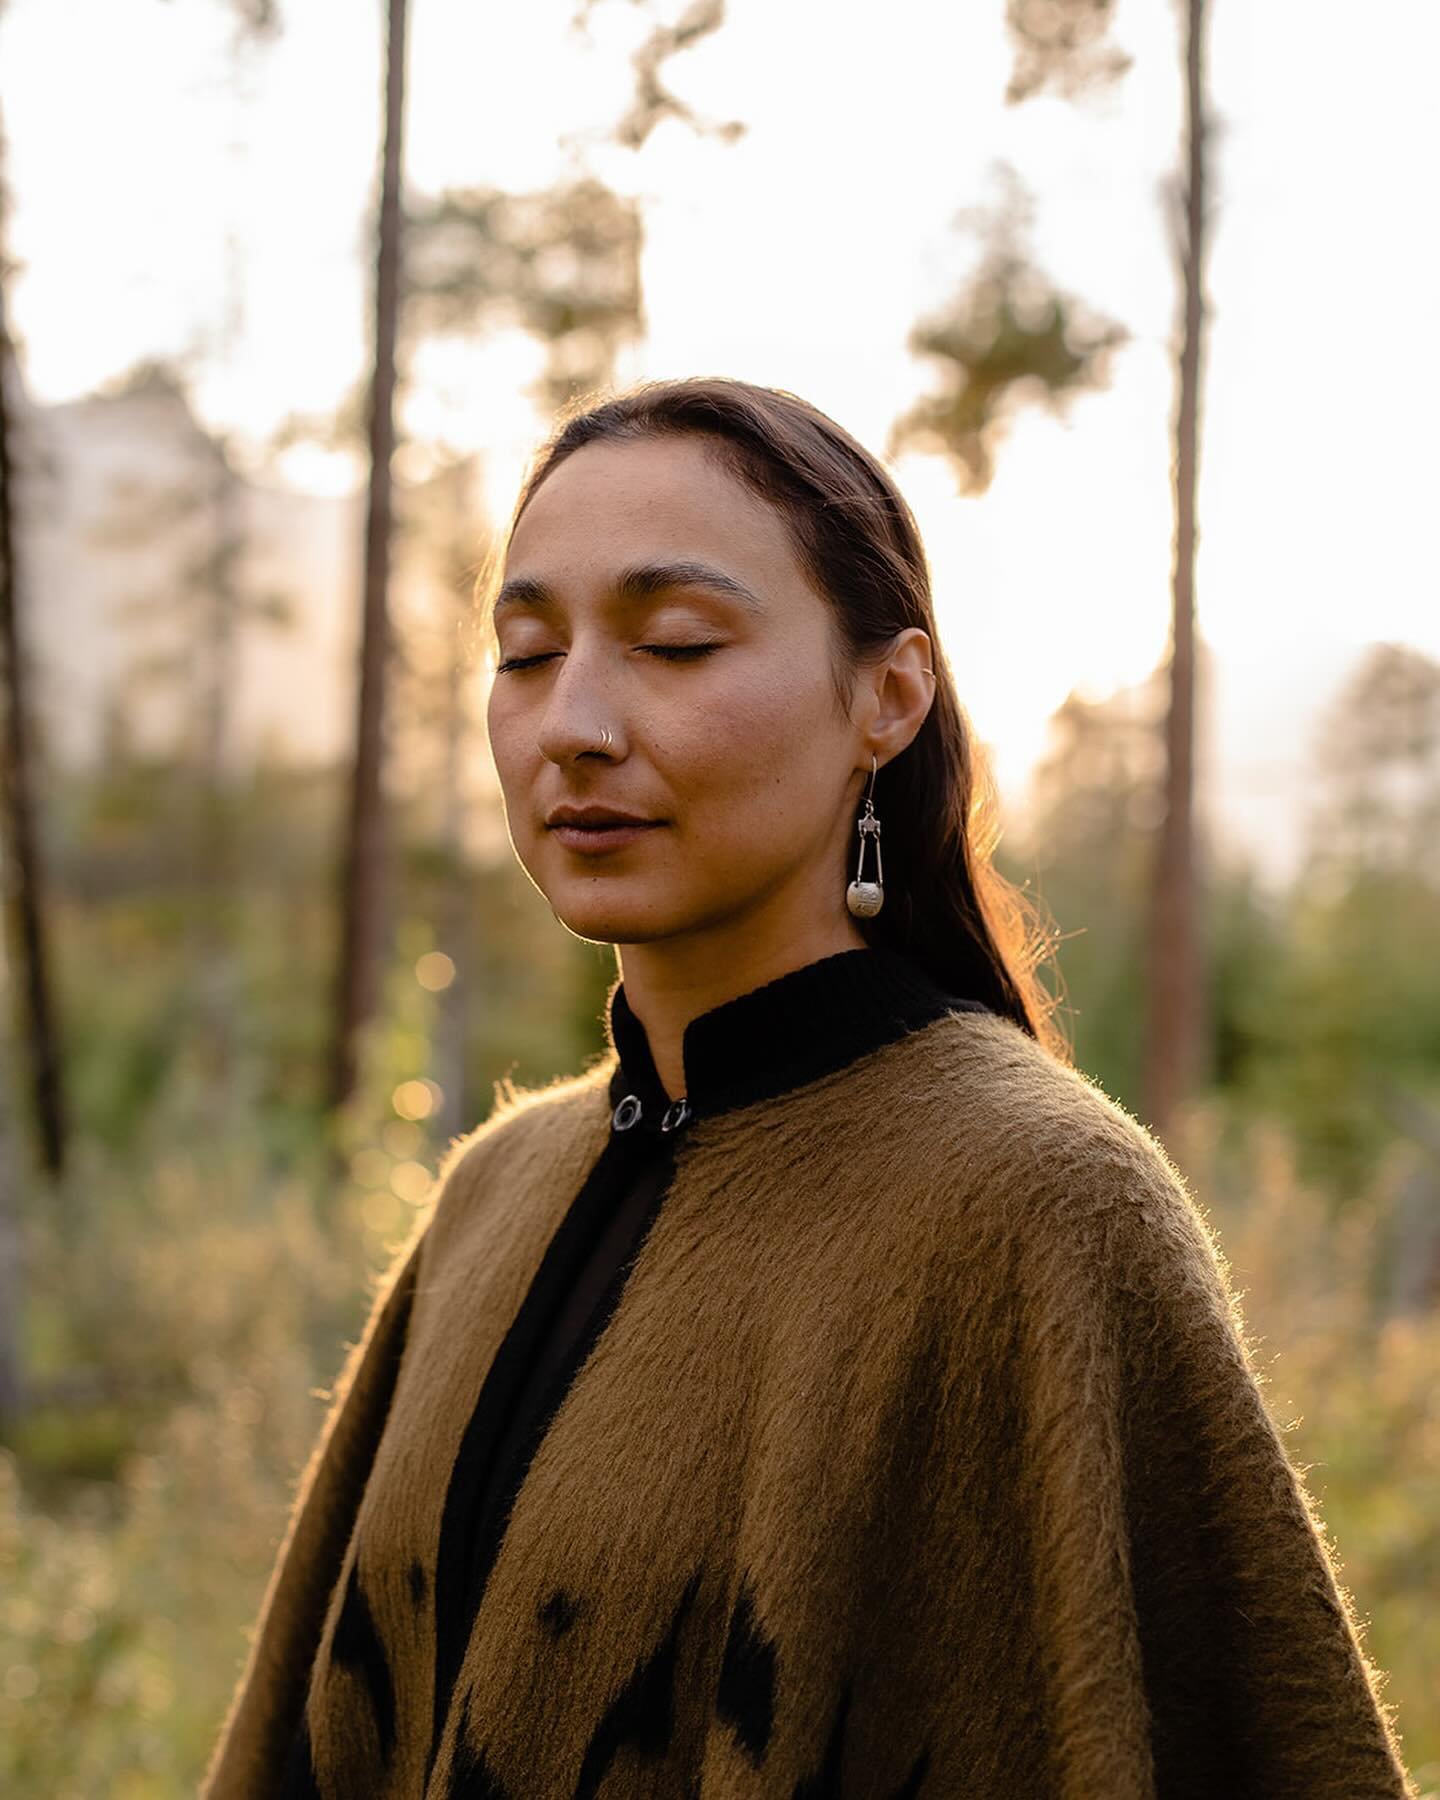 From a couple of summers ago with Alex, barefoot and grounded, connected with the Earth, honouring her origins, her heritage and her present-day self as a first-generation Canadian.

Alex&rsquo;s wool poncho is one traditionally worn in the Andes reg